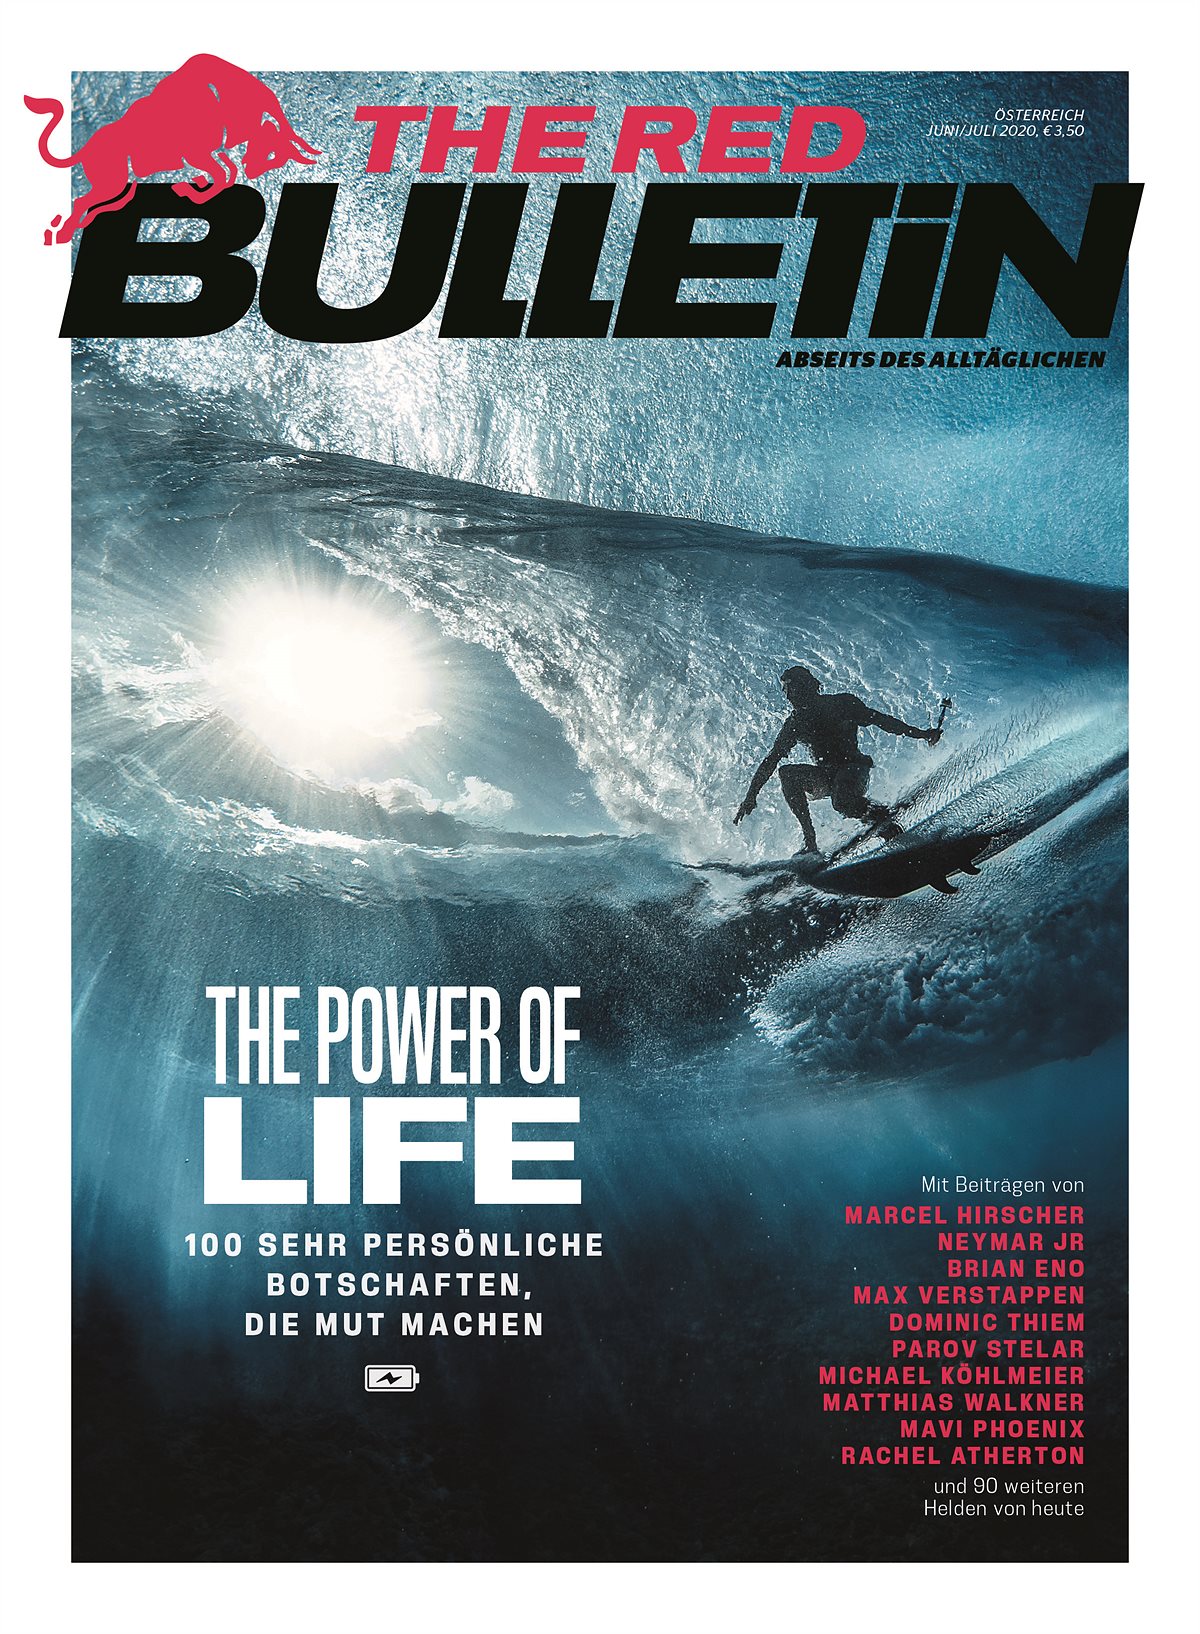 The Red Bulletin: The Power of Life Issue_Cover